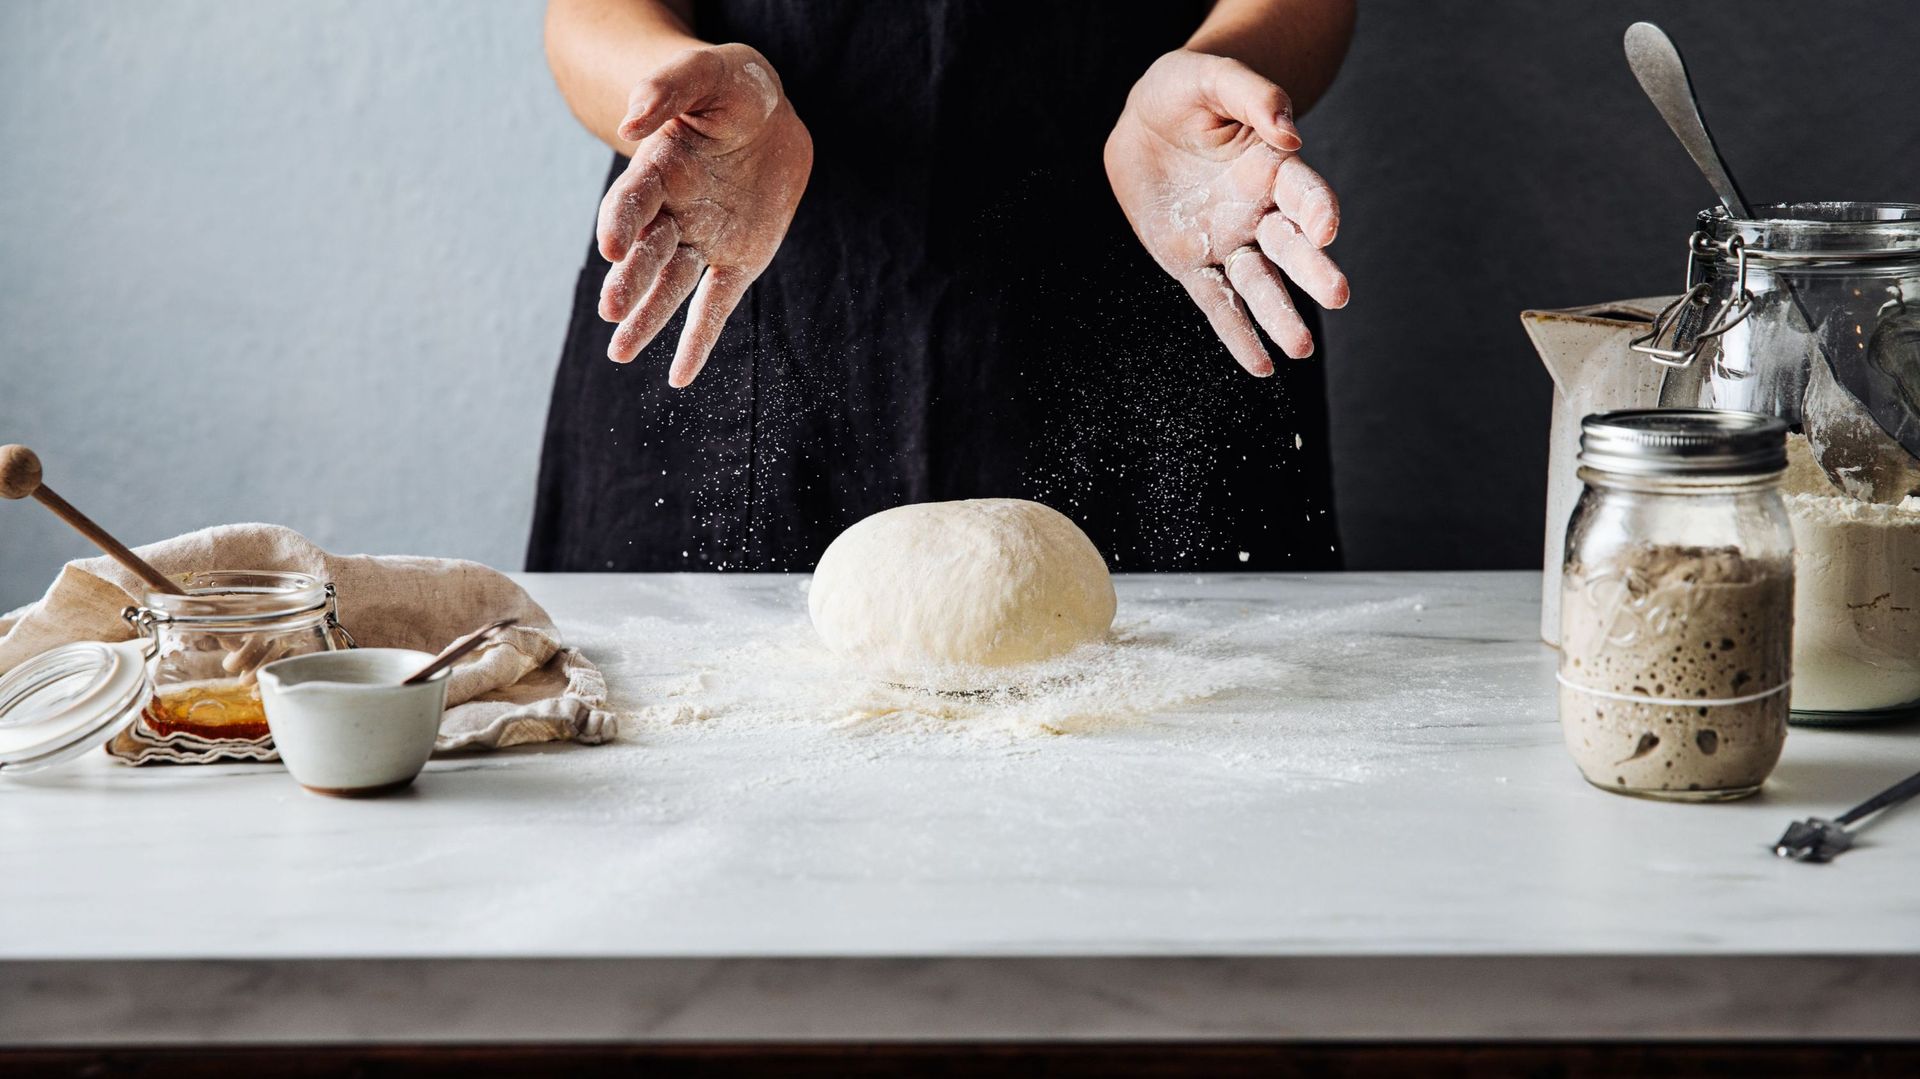 Woman throwing dough on flour over marble counter